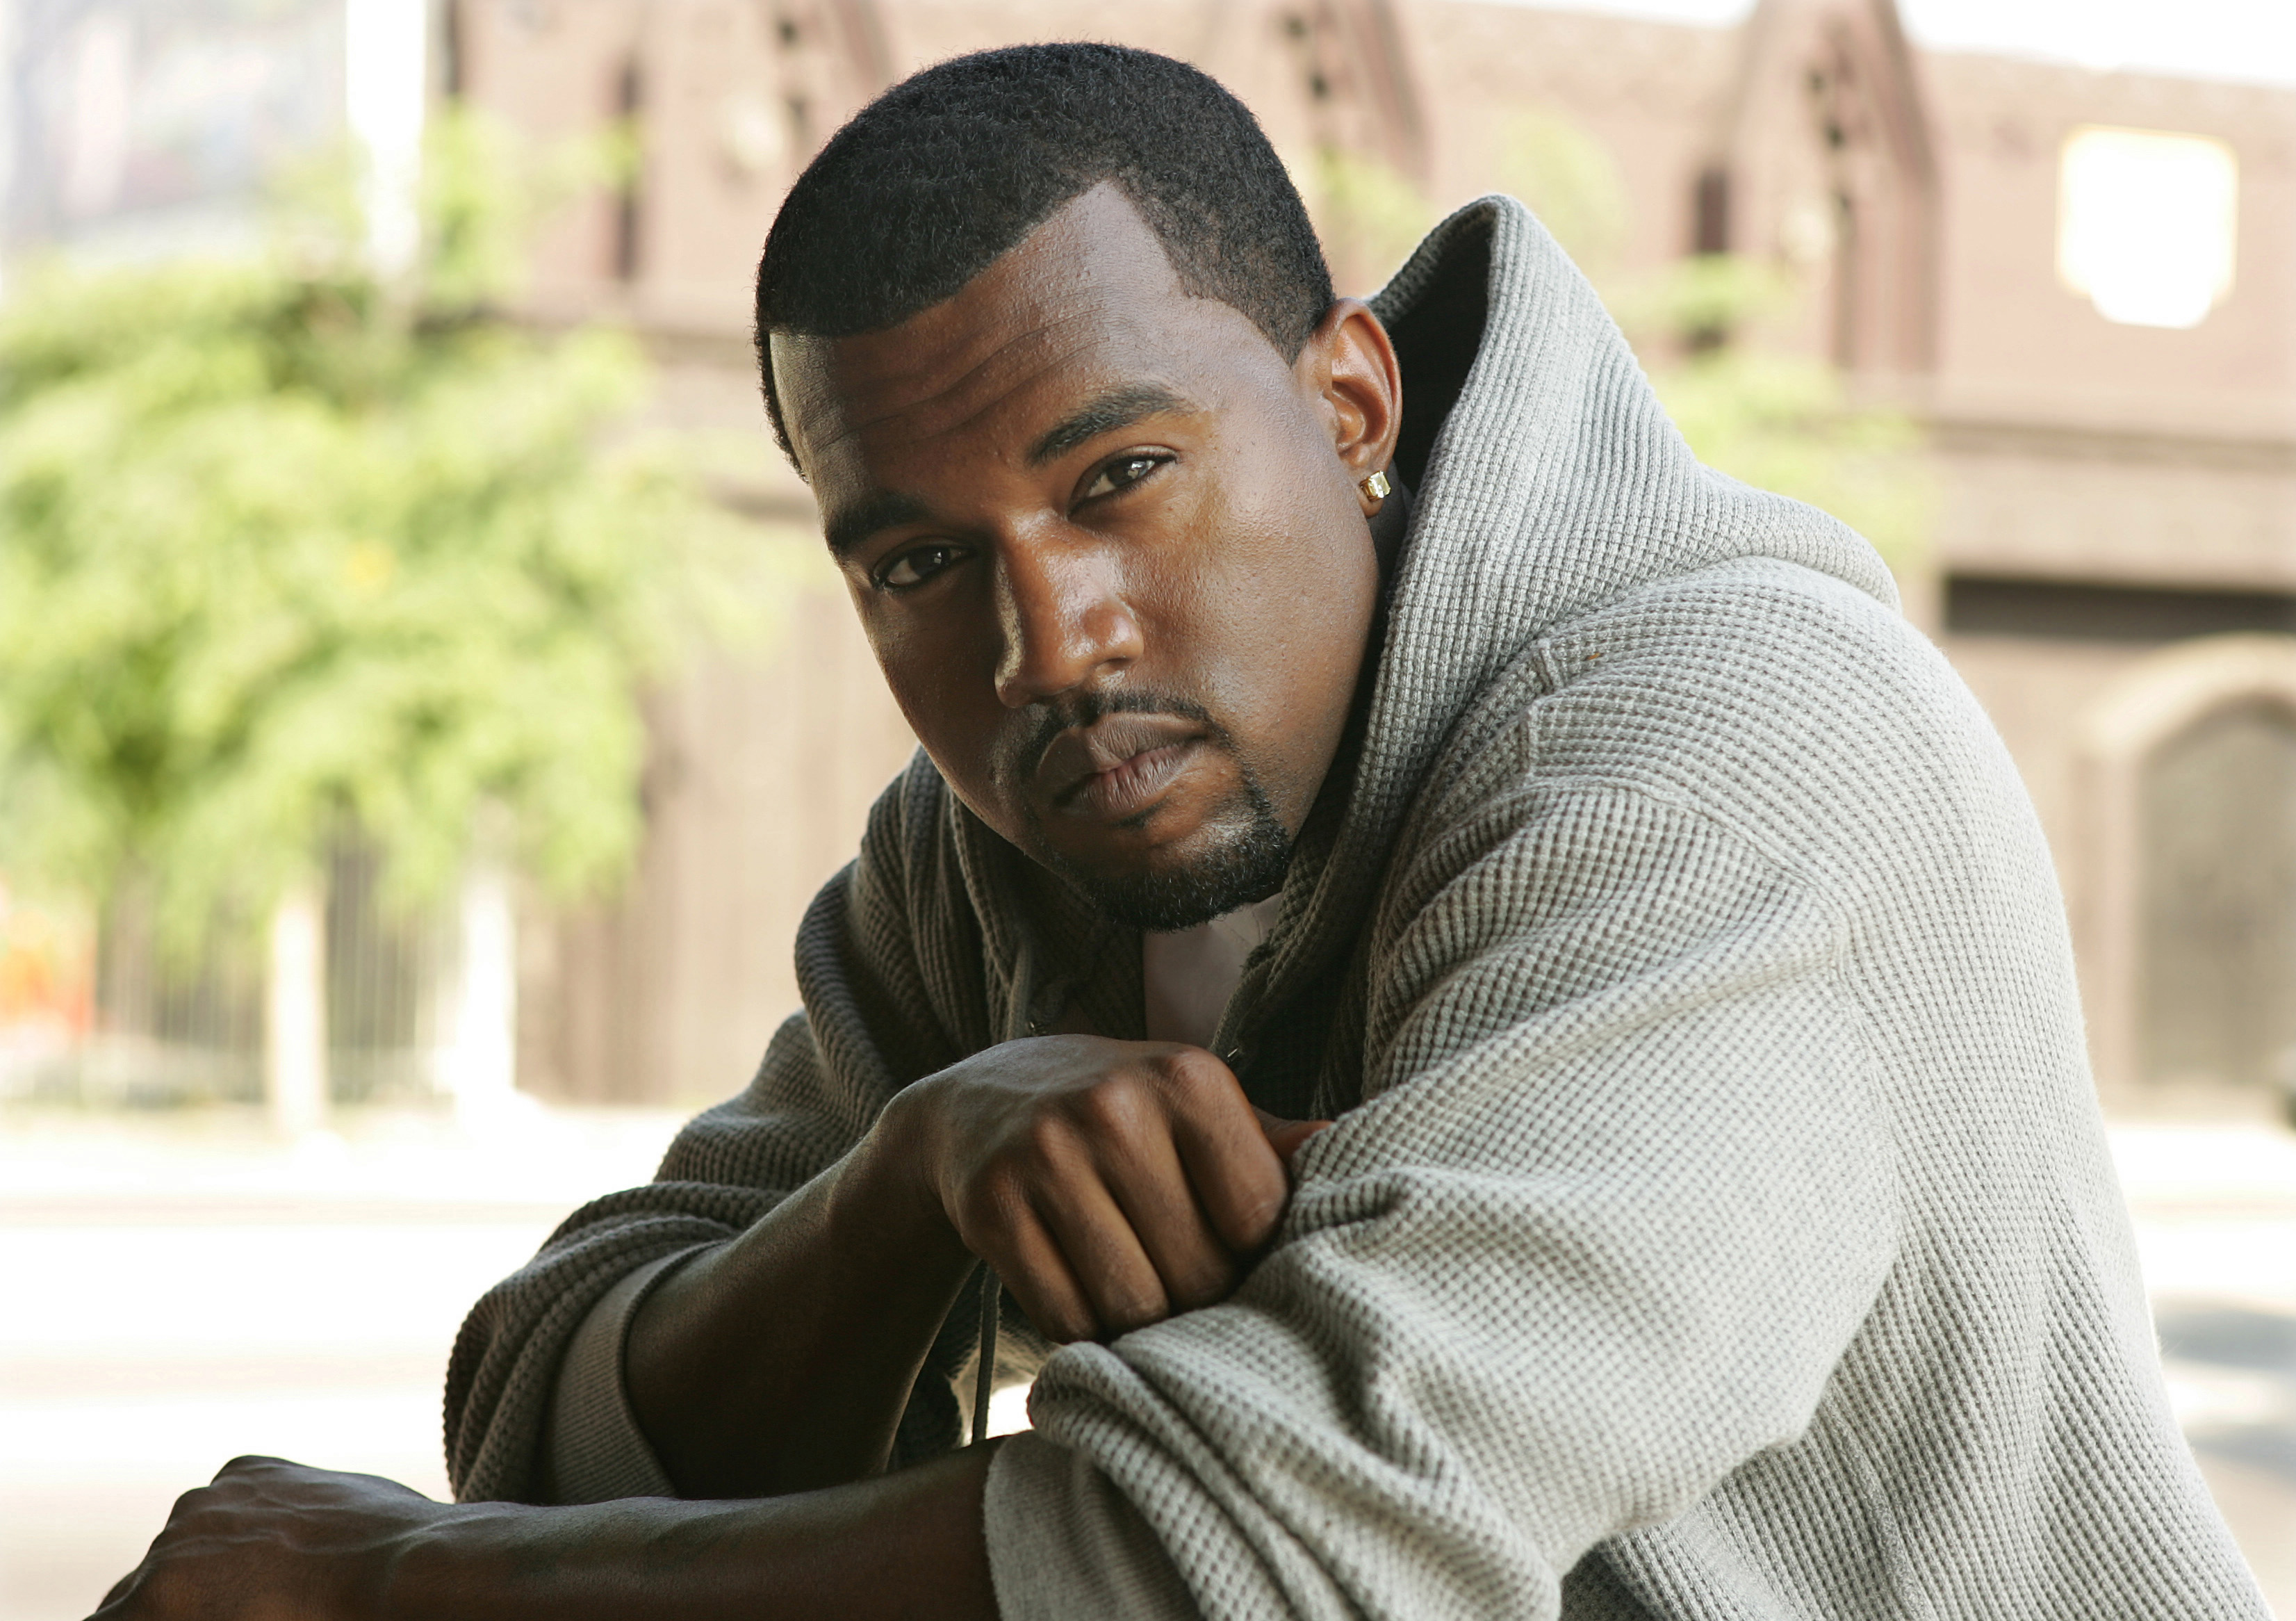 Kanye West at an undisclosed location on July 29, 2005, in Los Angeles, California. | Source: Getty Images